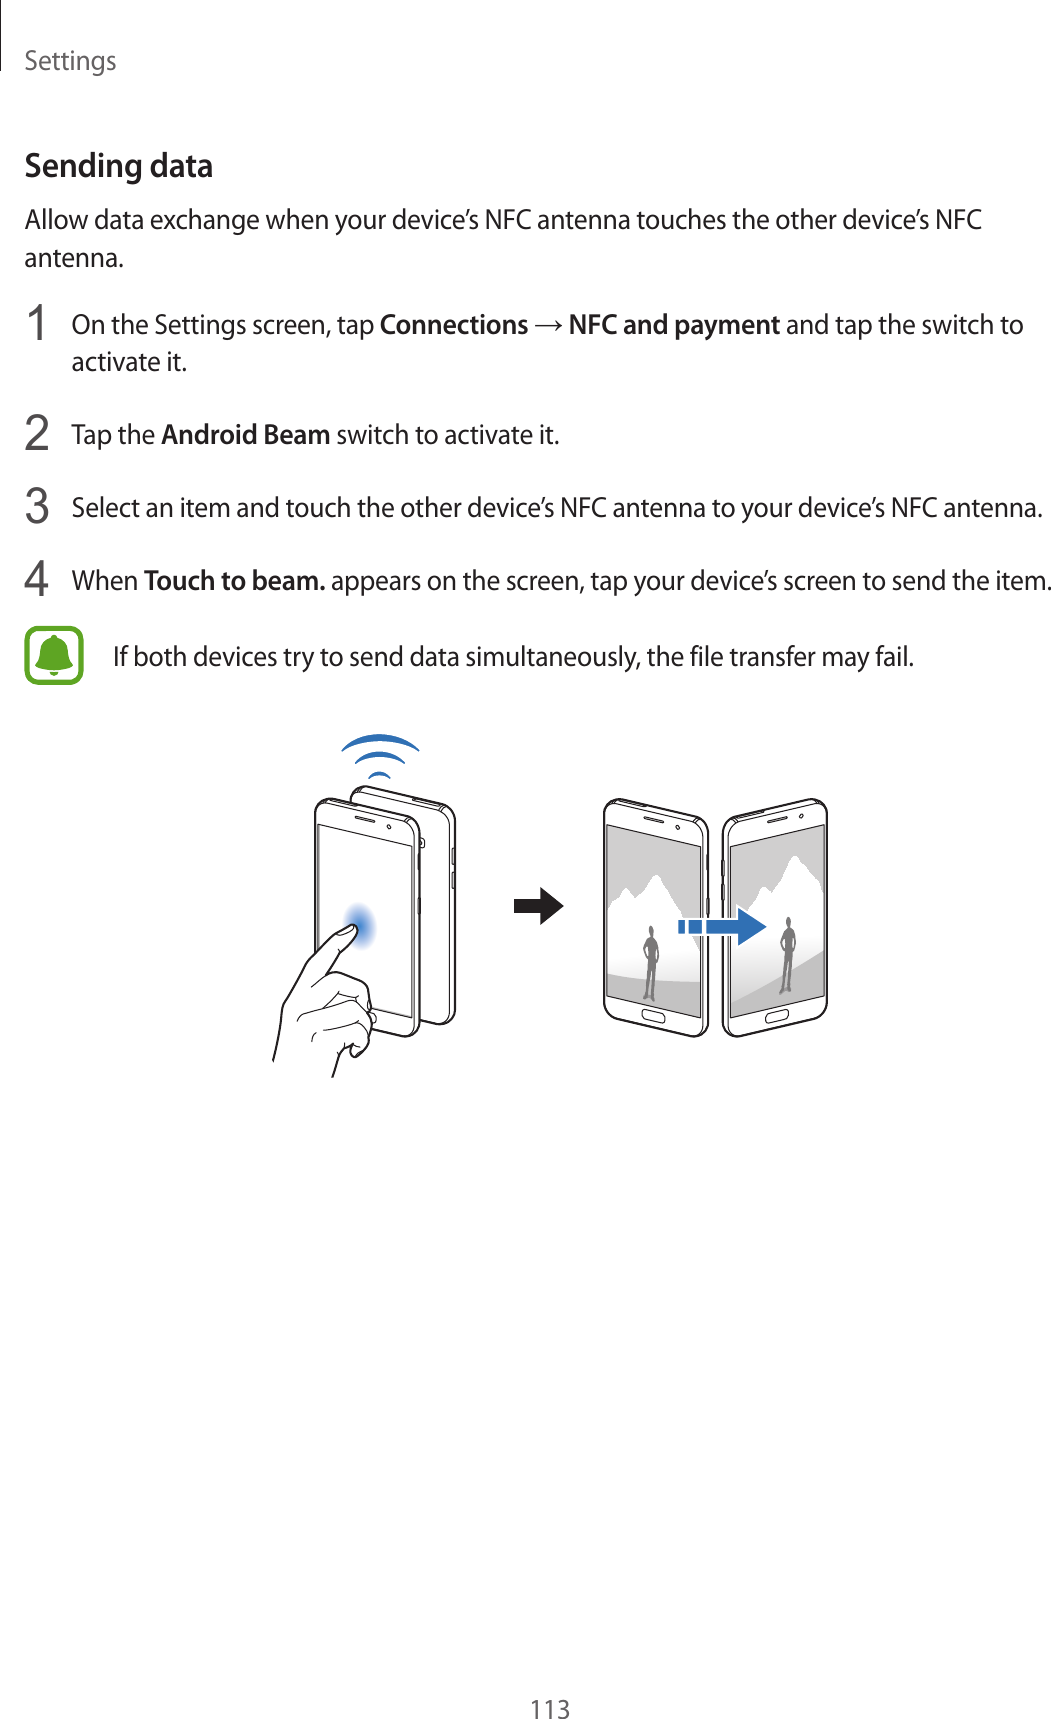 Settings113Sending dataAllow data exchange when your device’s NFC antenna touches the other device’s NFC antenna.1  On the Settings screen, tap Connections → NFC and payment and tap the switch to activate it.2  Tap the Android Beam switch to activate it.3  Select an item and touch the other device’s NFC antenna to your device’s NFC antenna.4  When Touch to beam. appears on the screen, tap your device’s screen to send the item.If both devices try to send data simultaneously, the file transfer may fail.